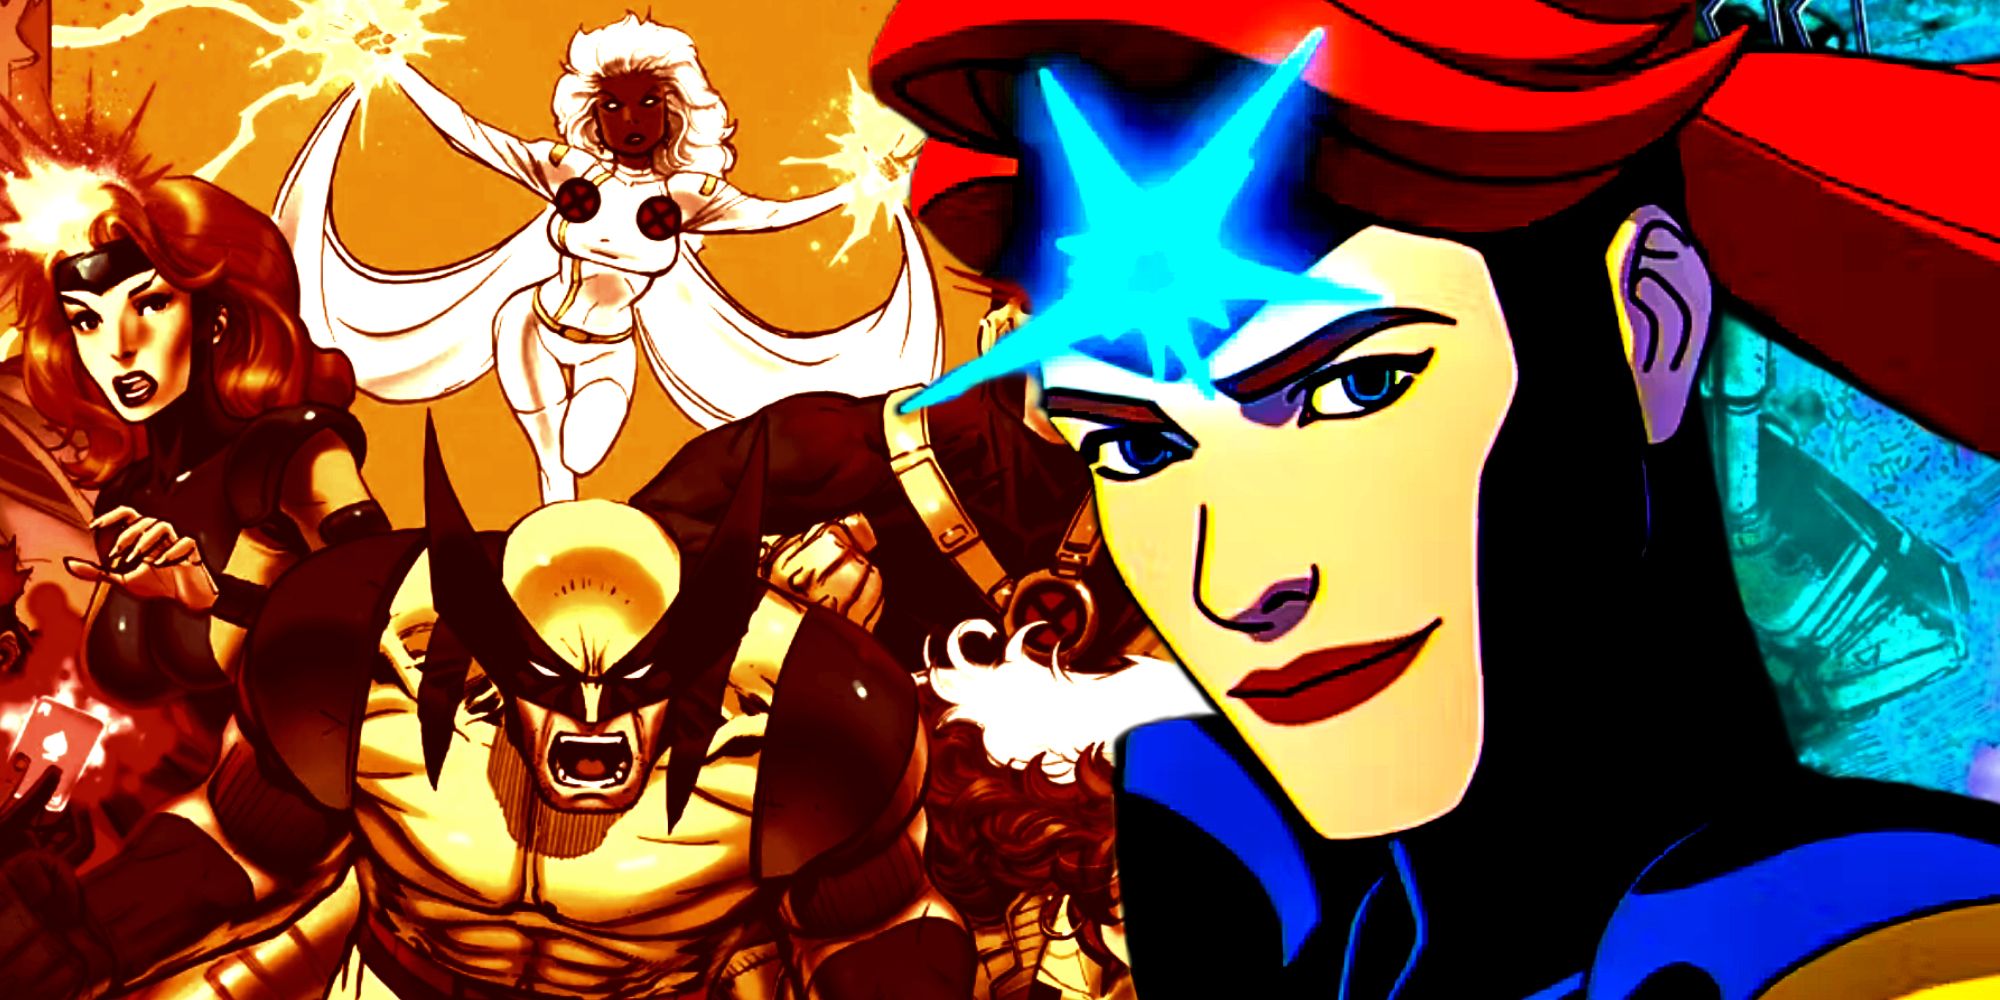 Jean Grey Smiling in X-Men '97 and the Mutants Team Up in X-Men The Animated Series